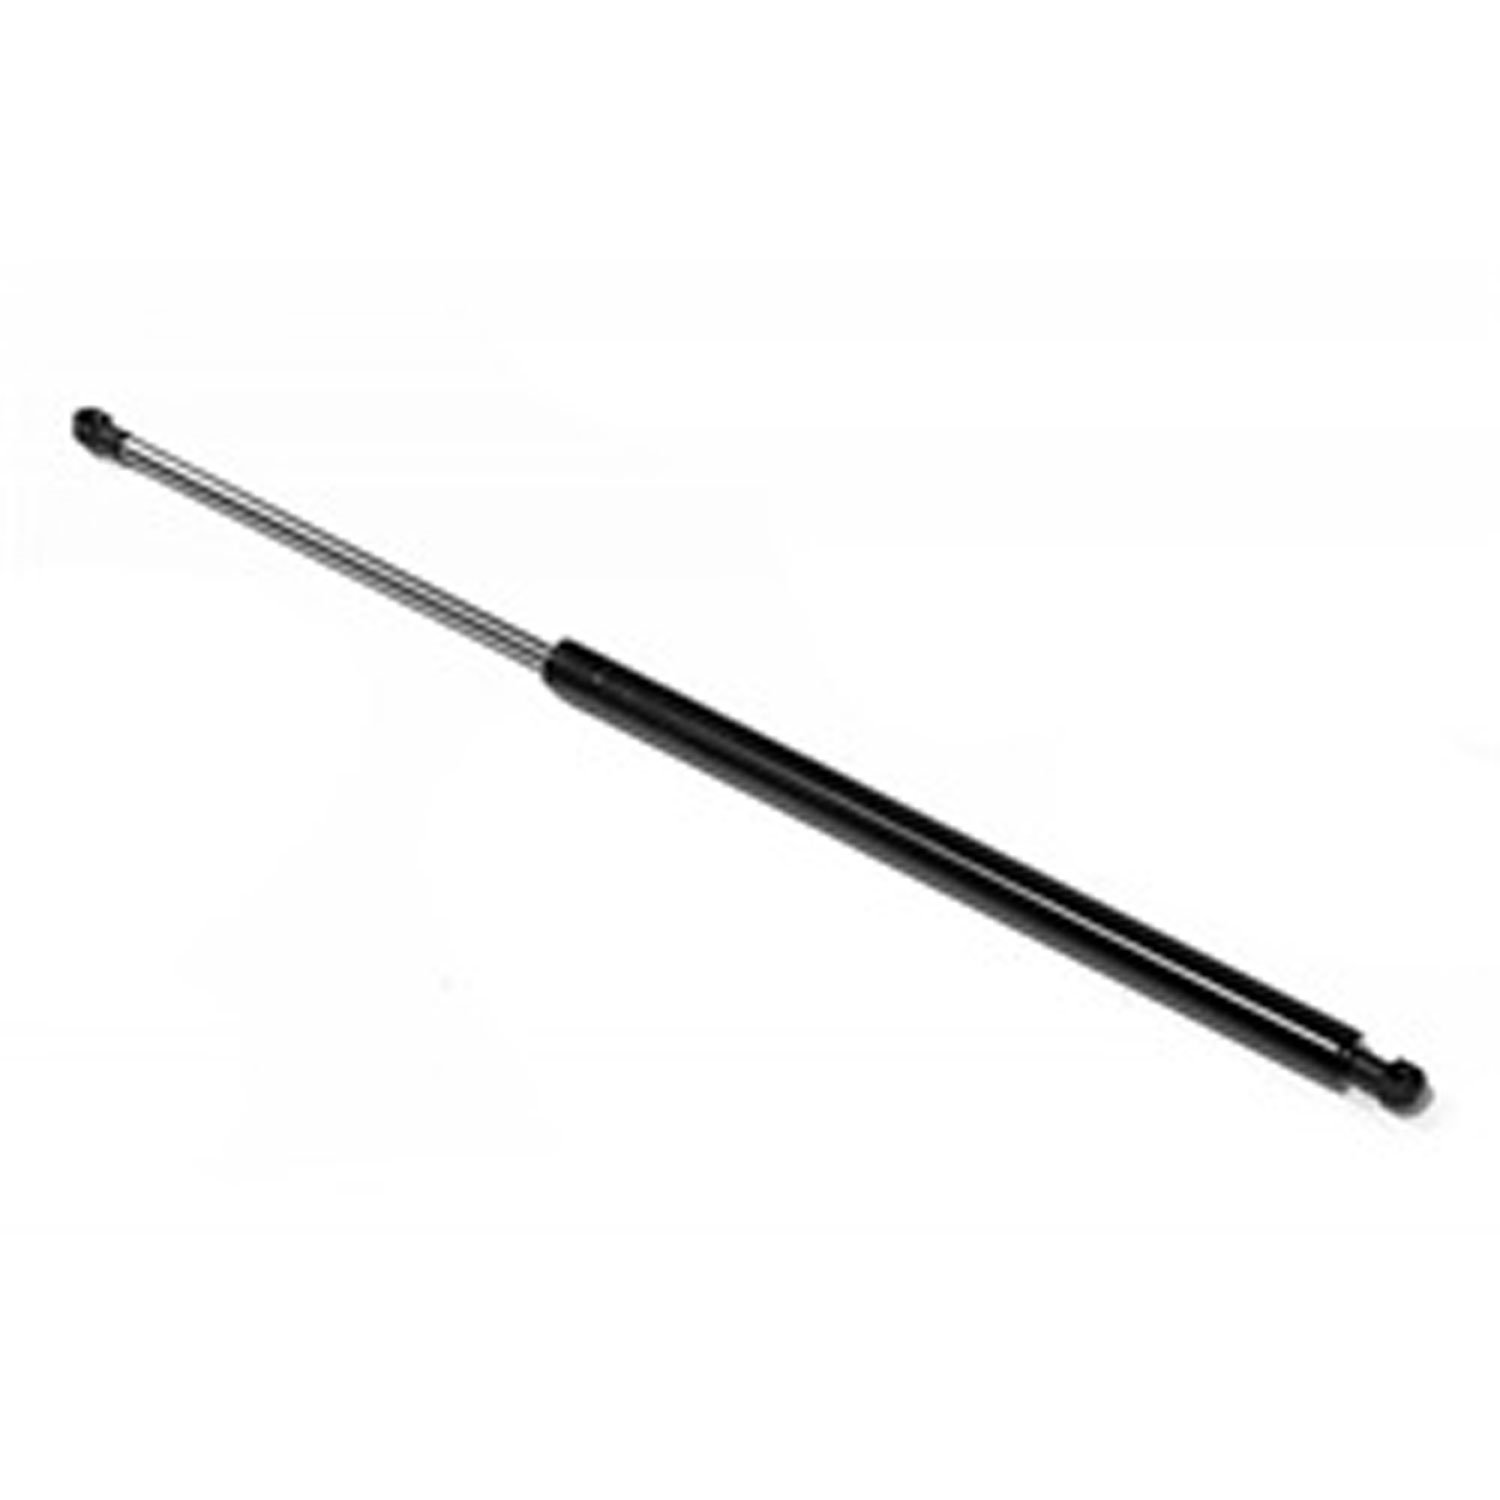 Replacement gas strut from Omix-ADA, Fits liftgate on 84-94 Jeep Cherokee XJ Will fit left or right side.